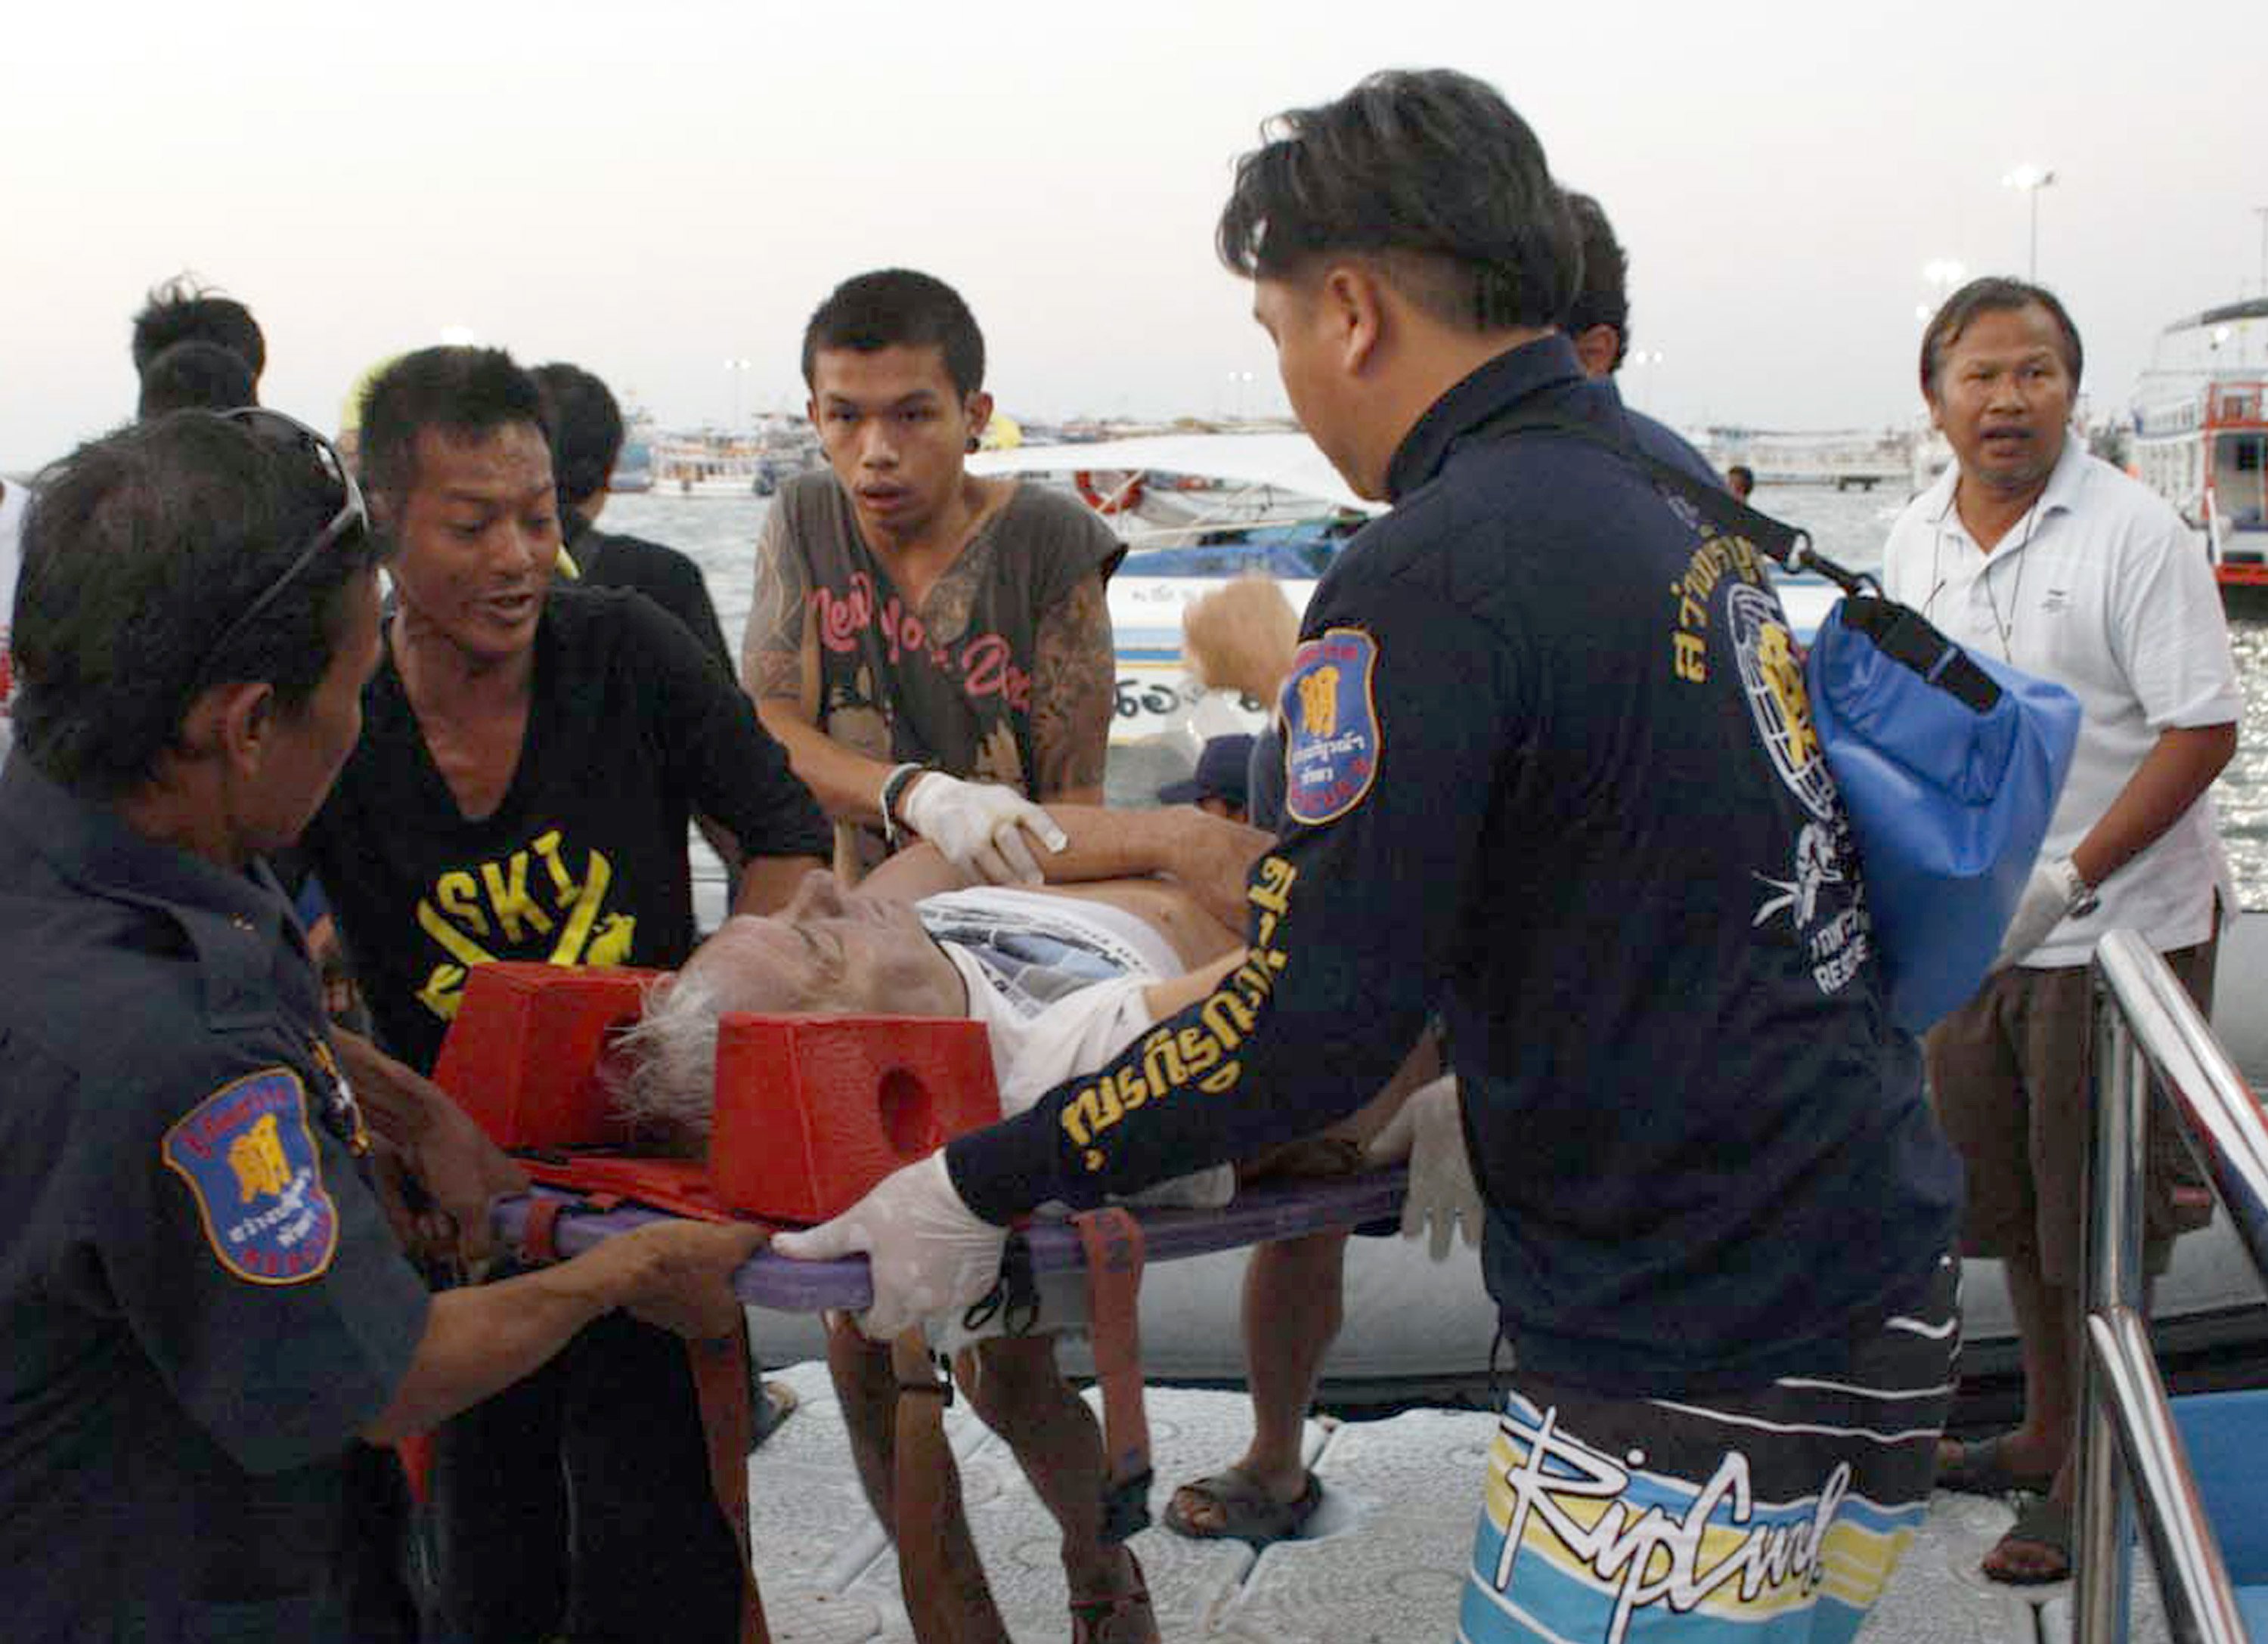 Thai rescuers carry an injured tourist on to the pier after being rescued from the sea after the boat accident in Pattaya. Photo: AP